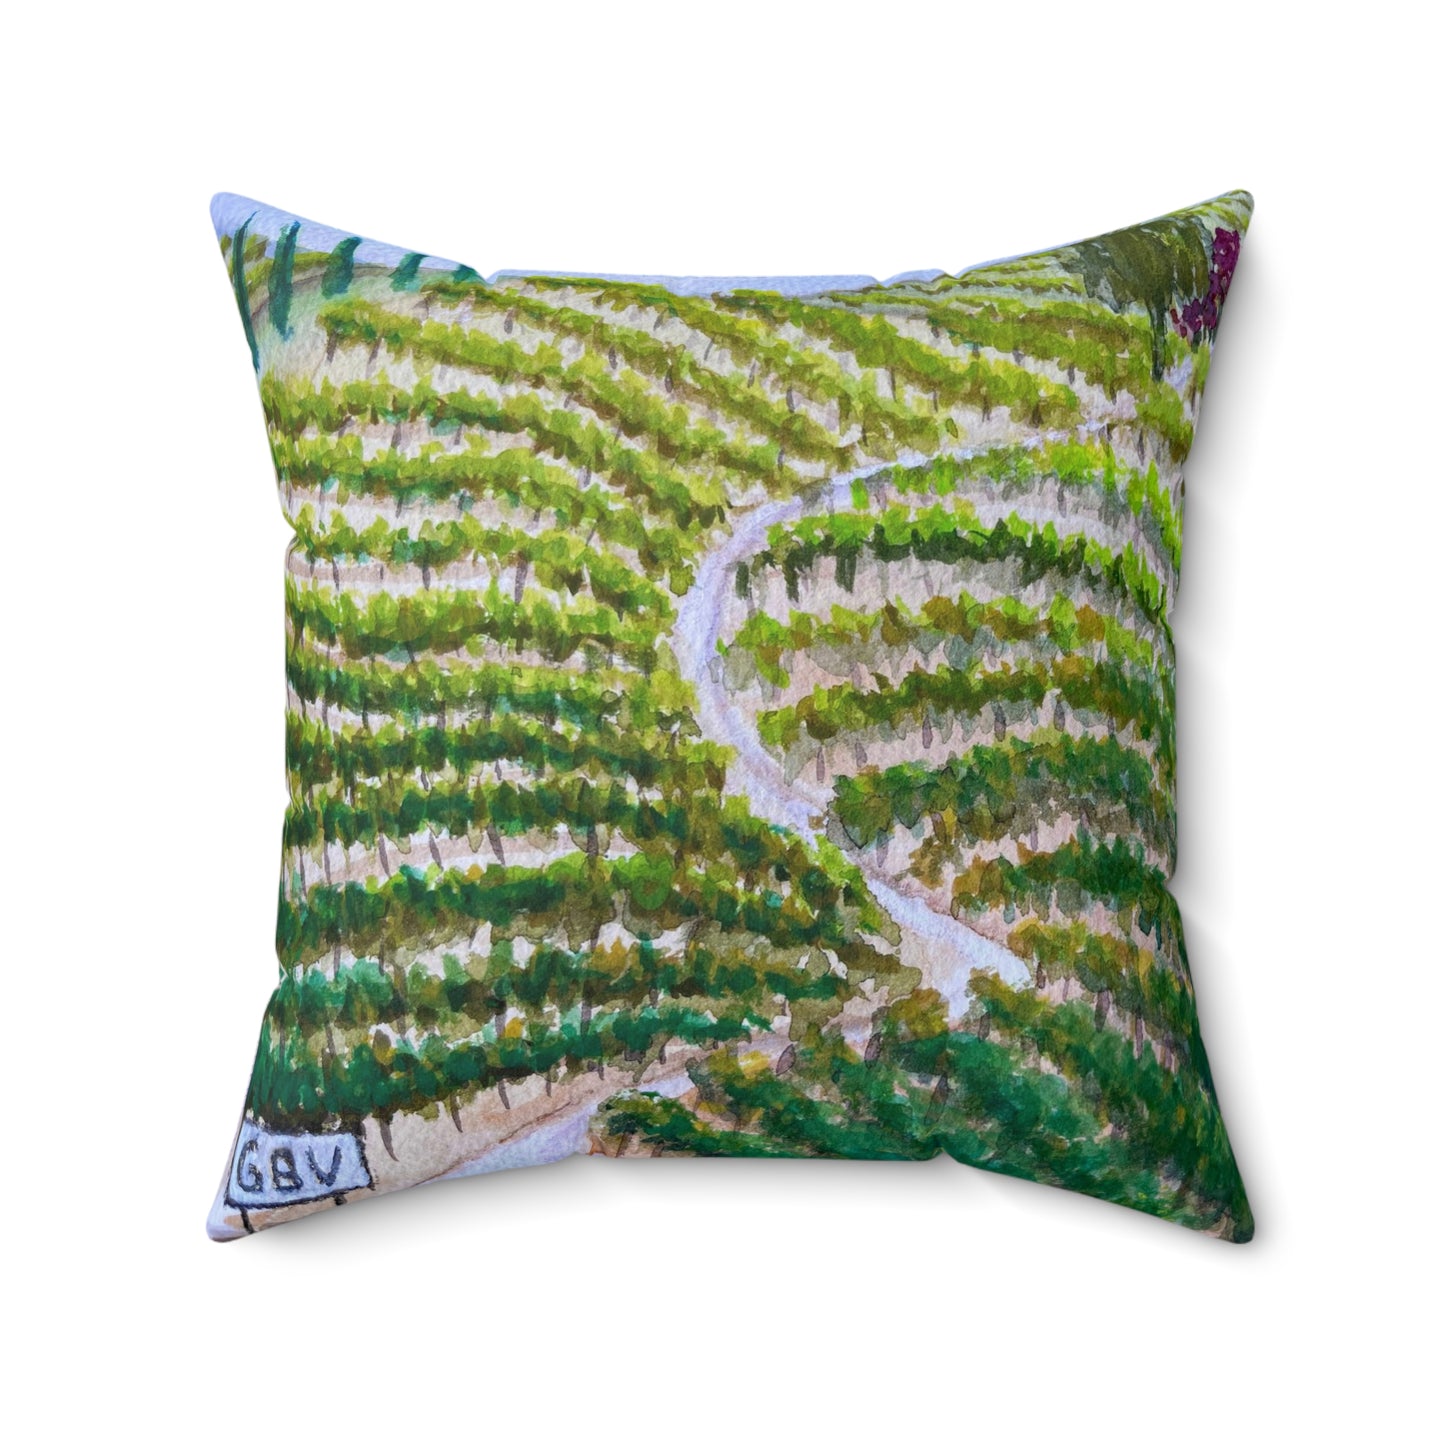 Road to the Villa GBV  Indoor Spun Polyester Square Pillow